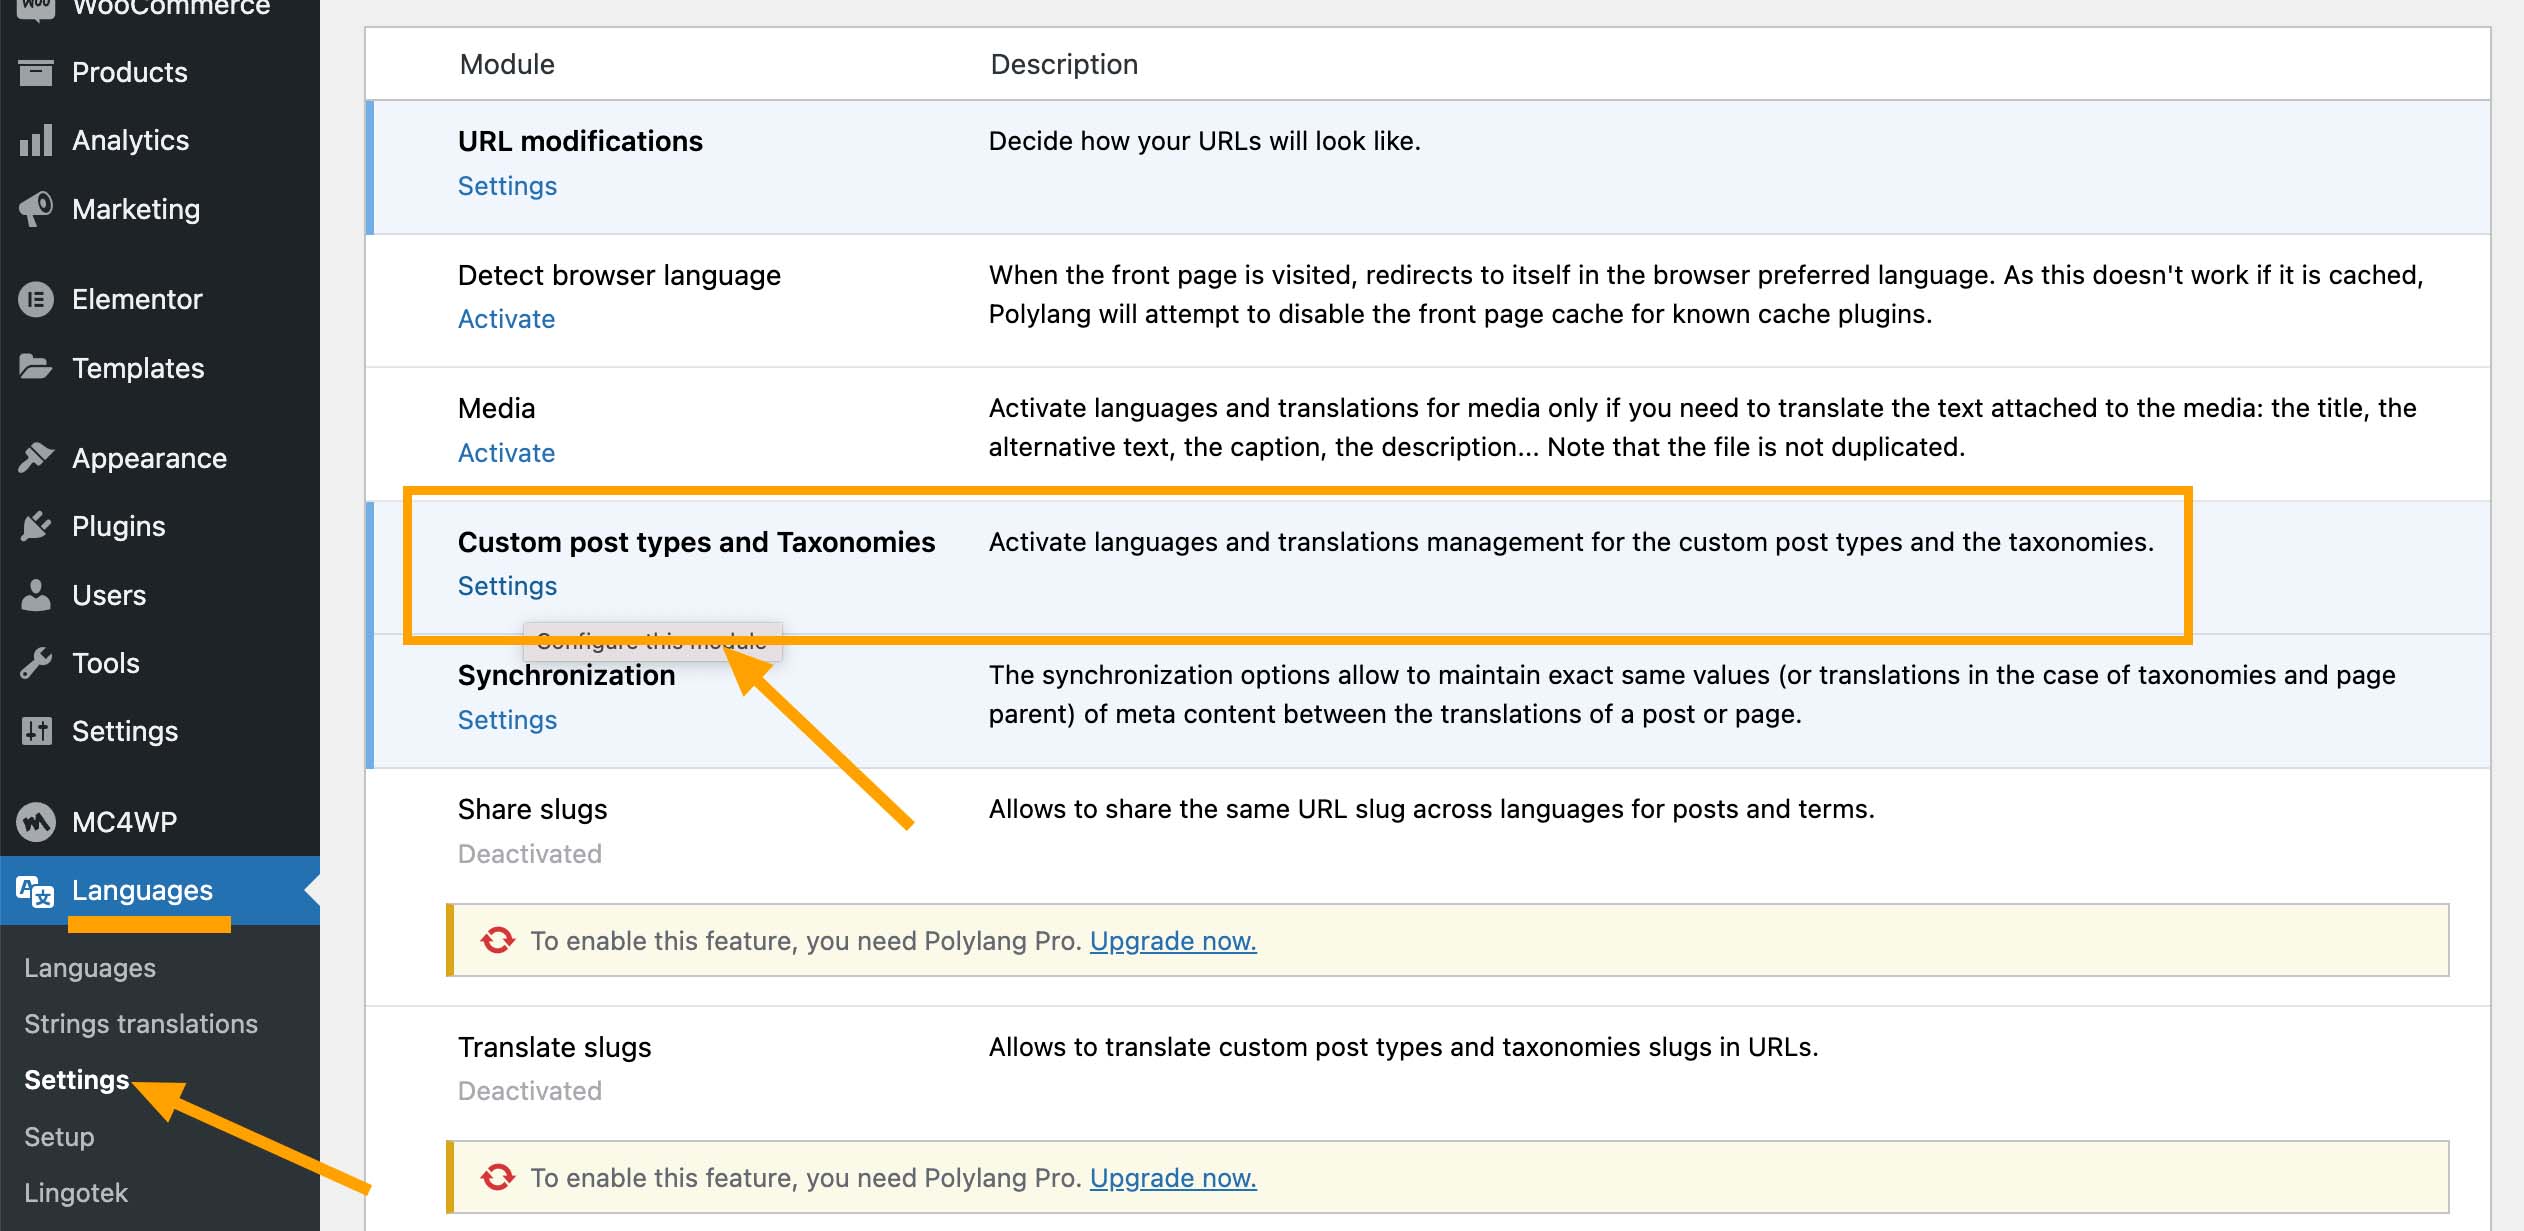 Activate languages and translations for custom post types.